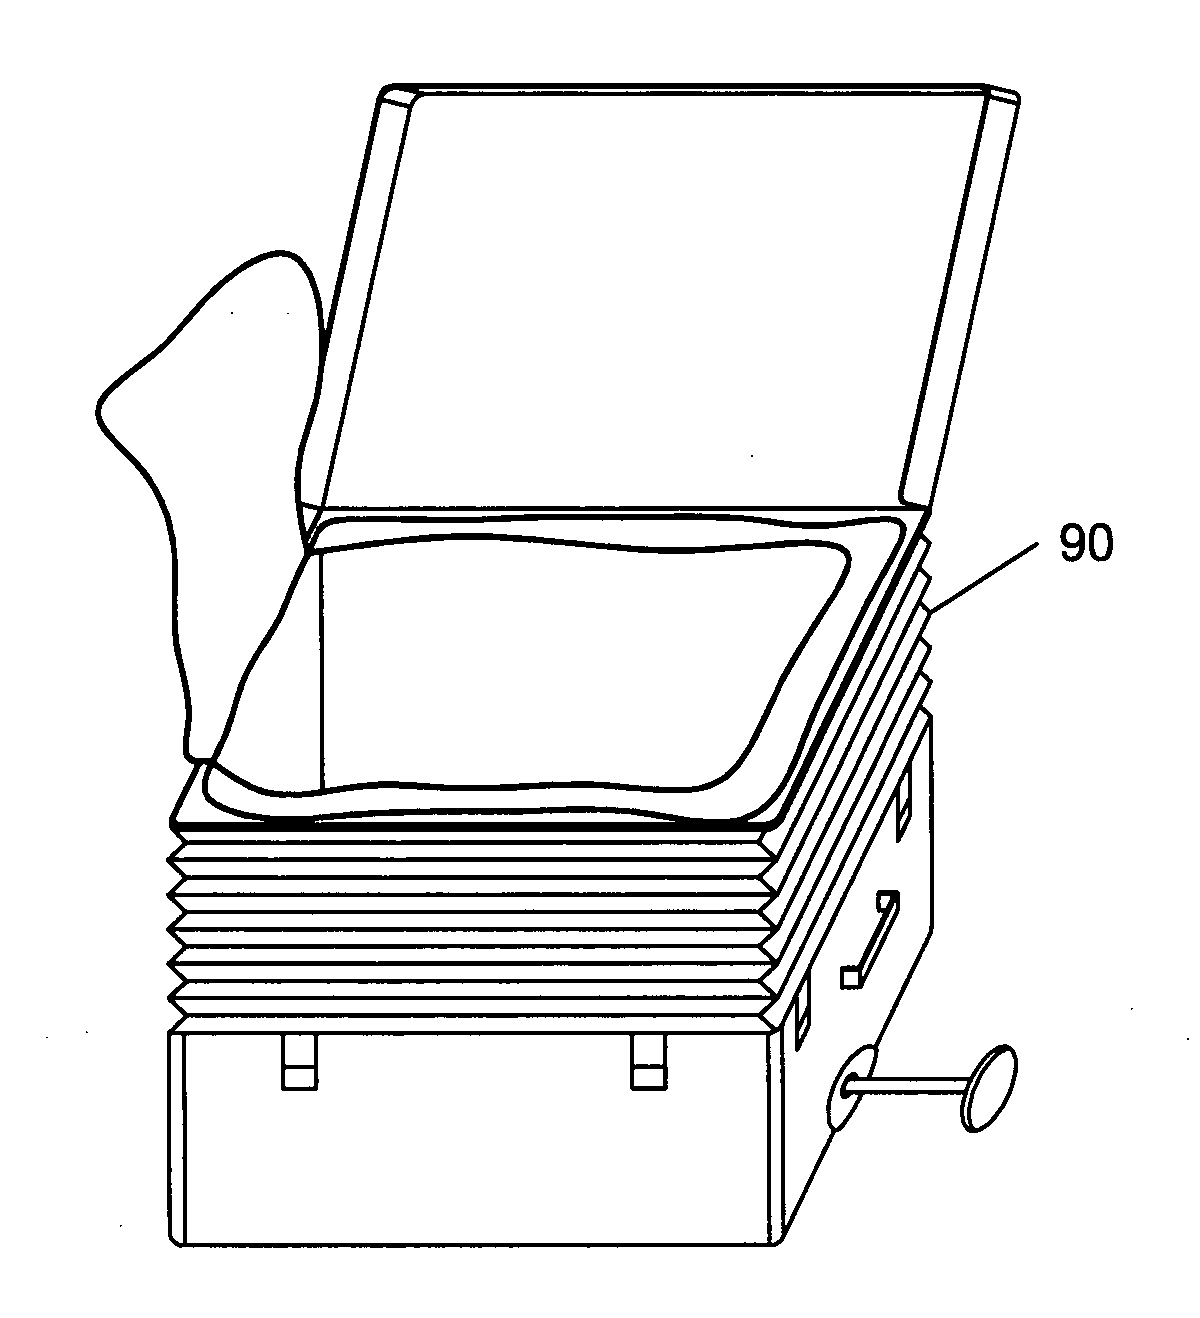 Luggage Comprising a Vacuum Device